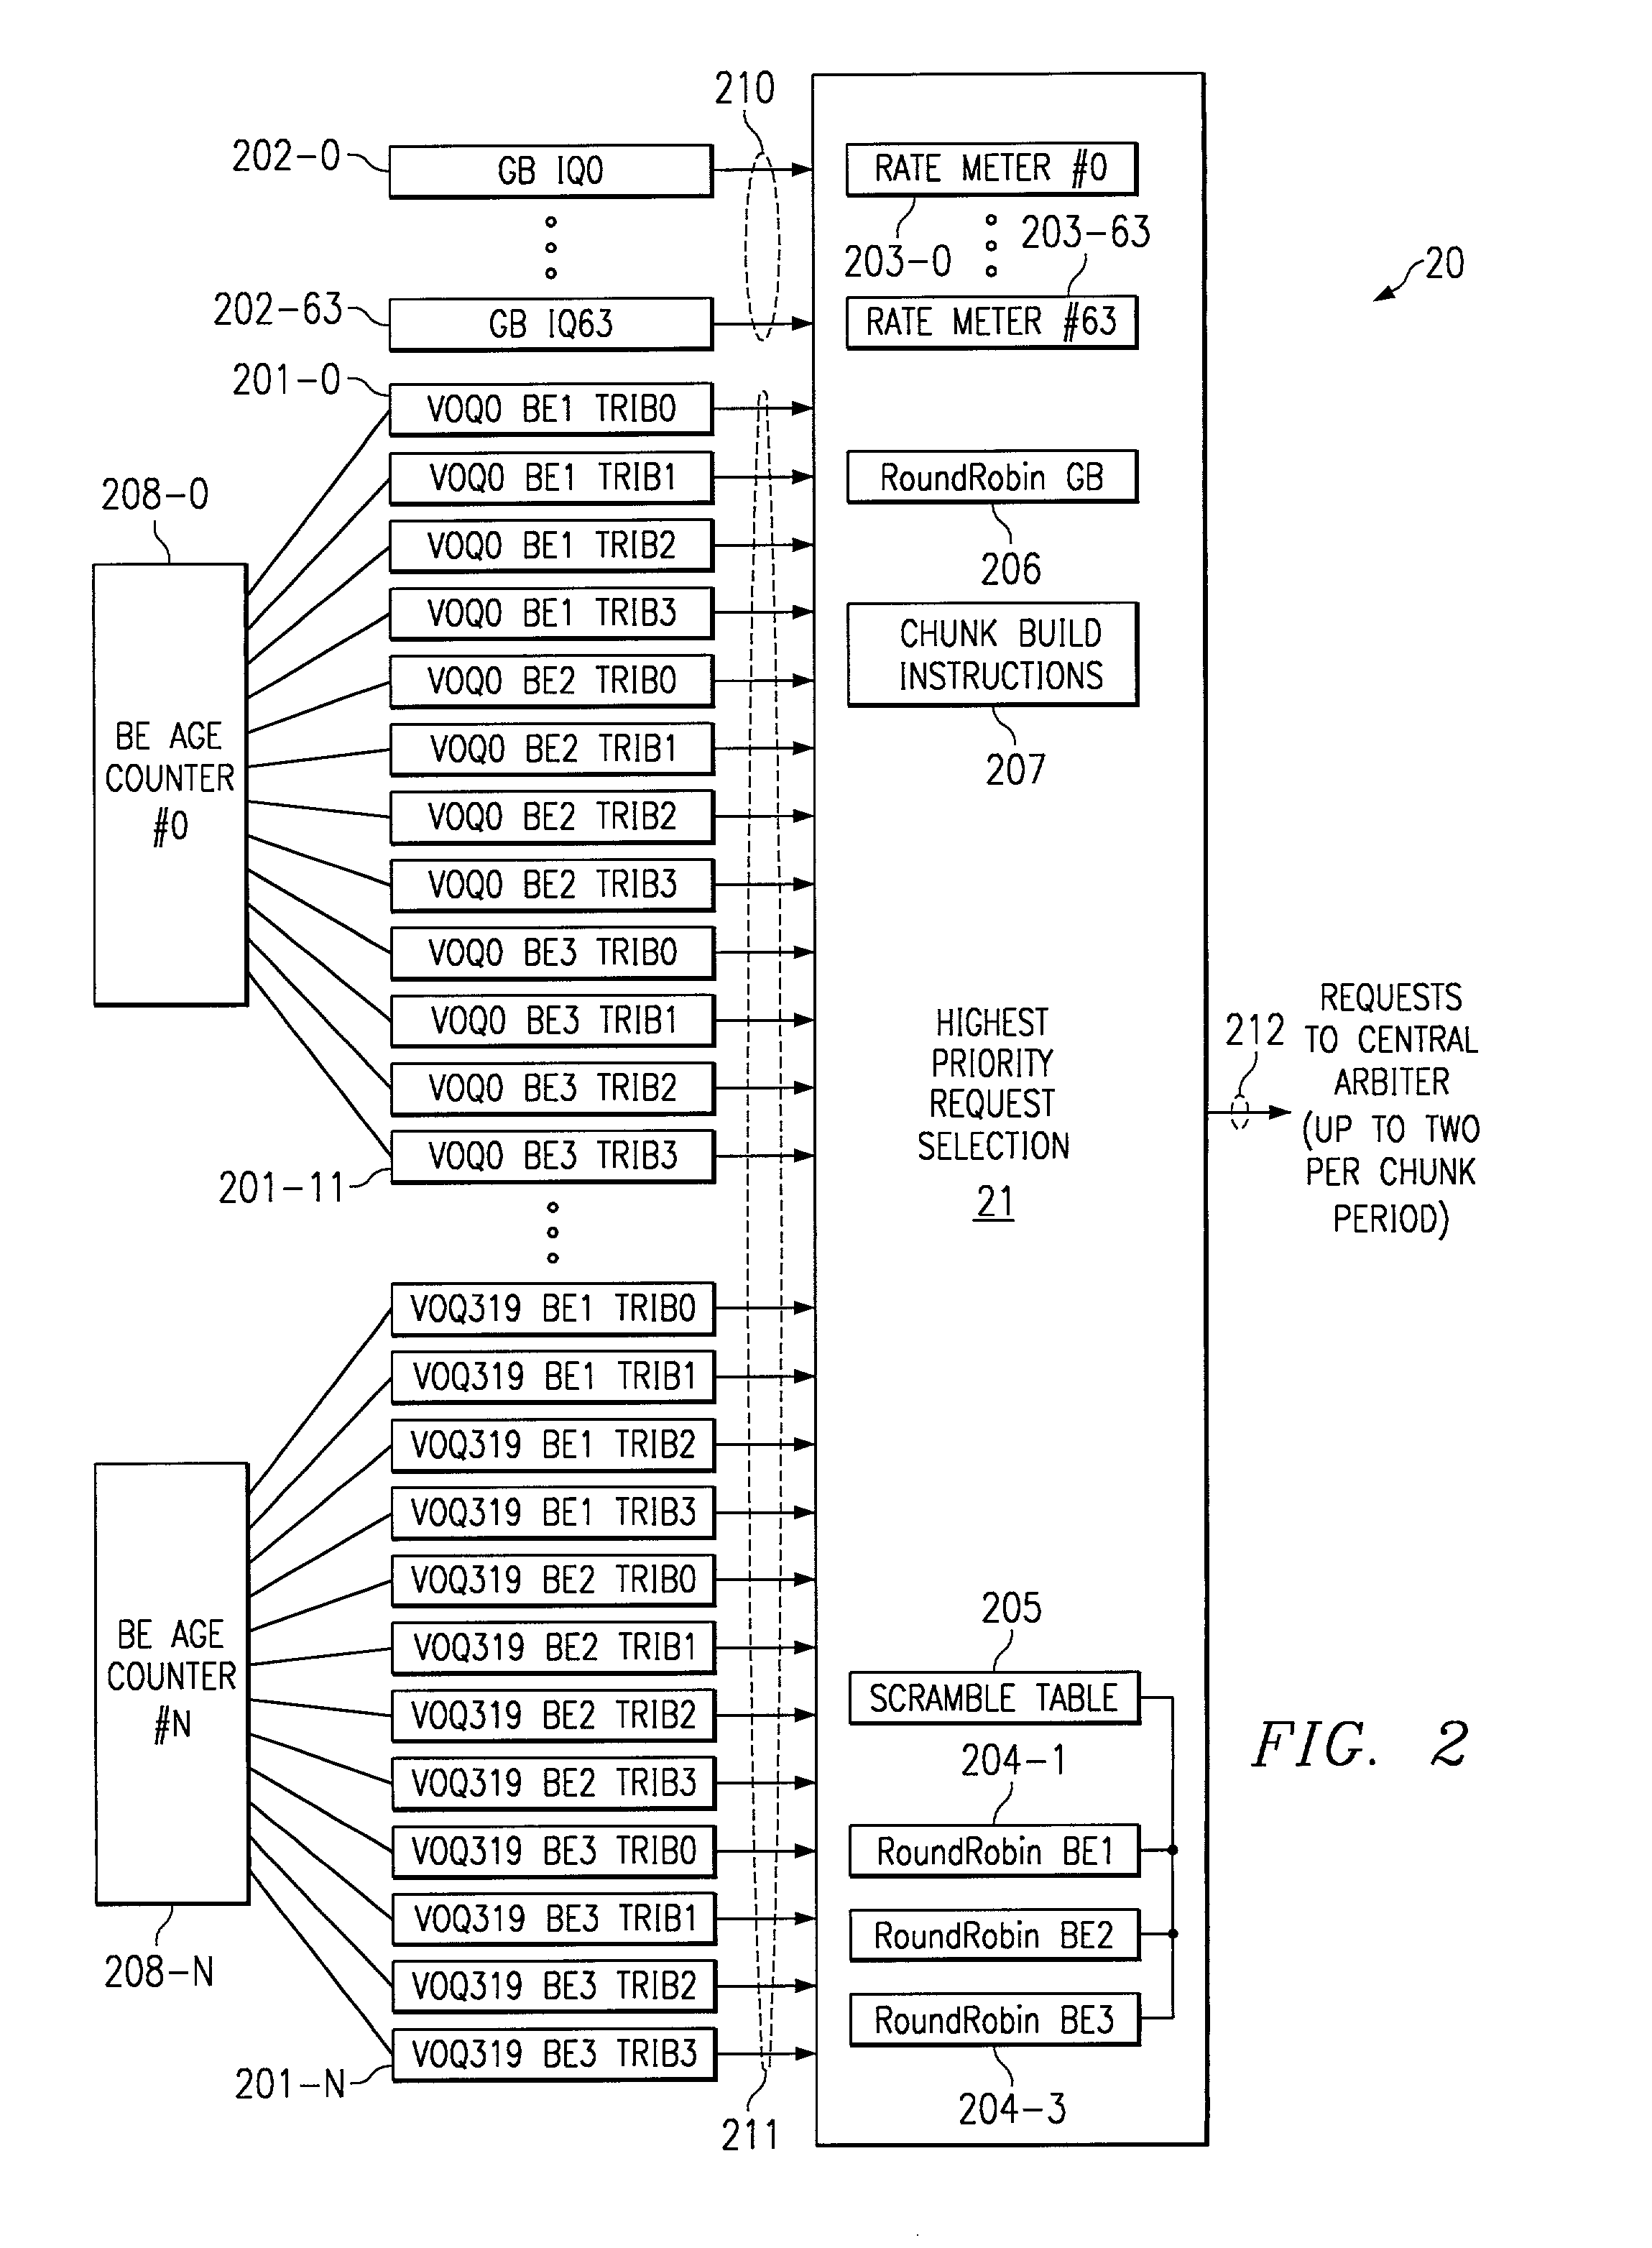 System and method for router central arbitration